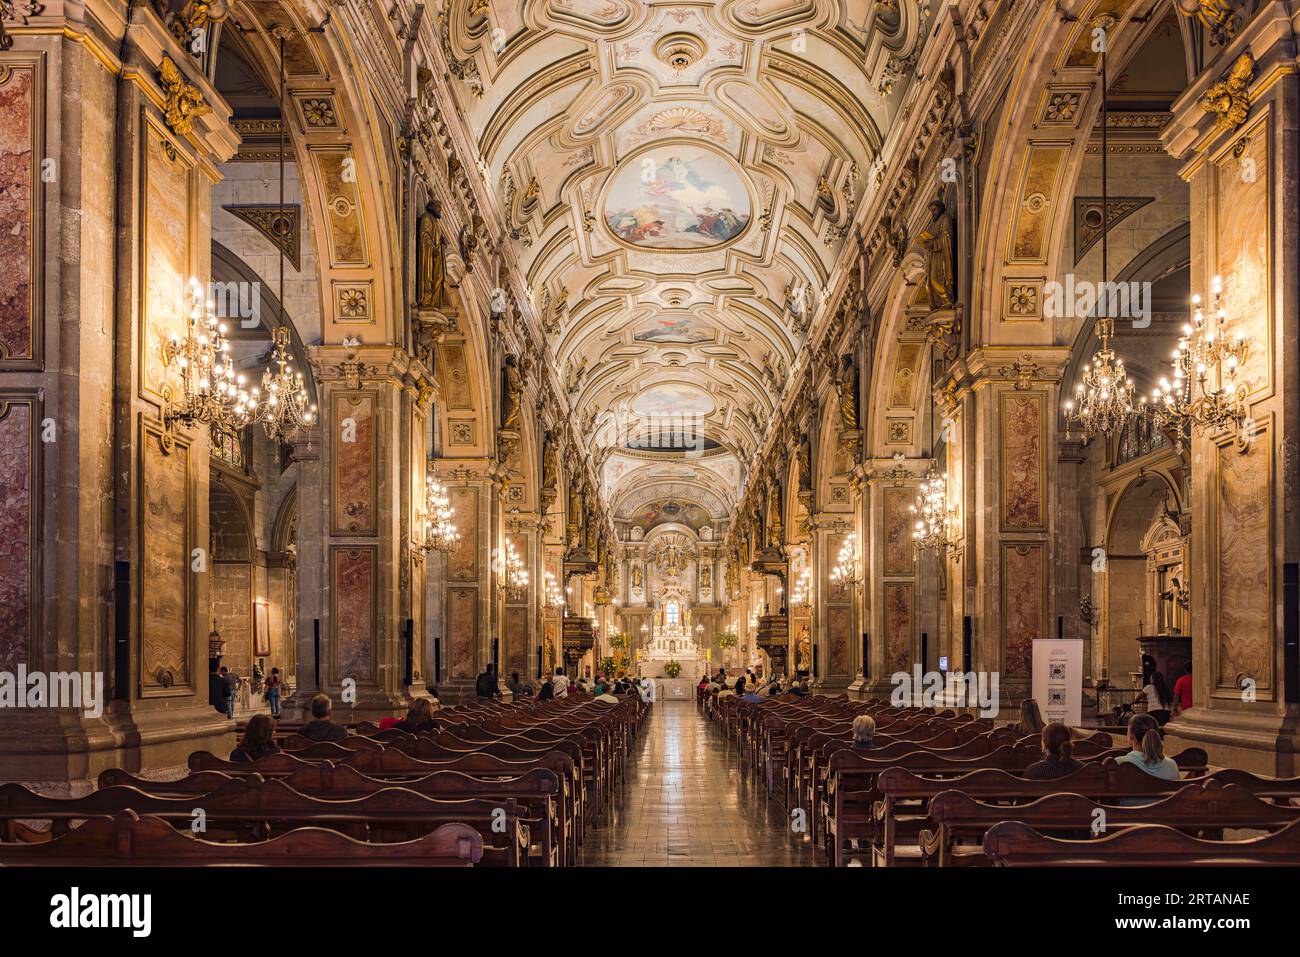 The ornate and brightly lit nave of the Catedral Metropolitana de Santiago de Chile, South America Stock Photo